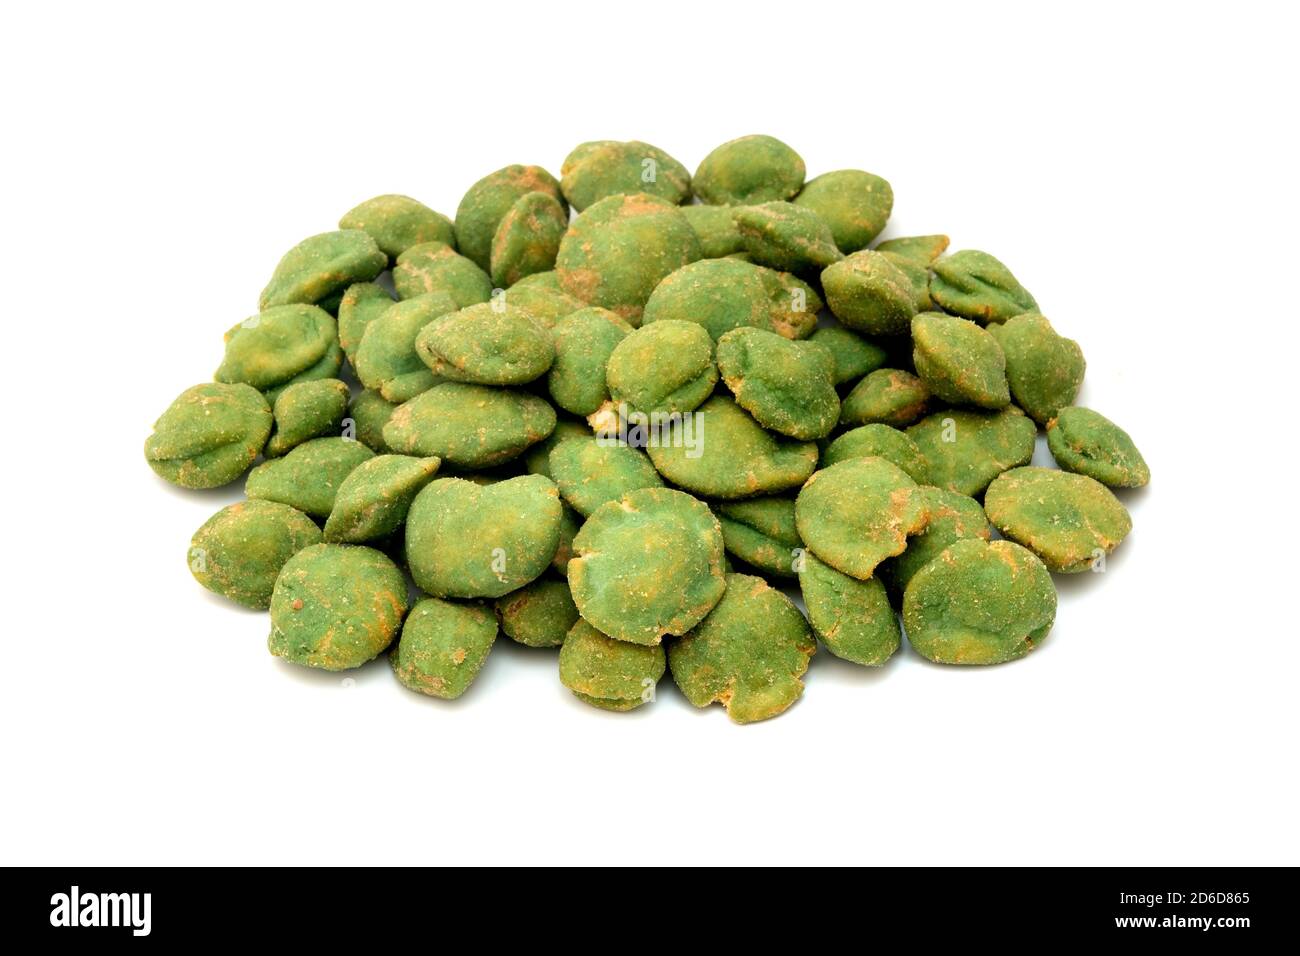 Wasabi peanuts on a white background Stock Photo